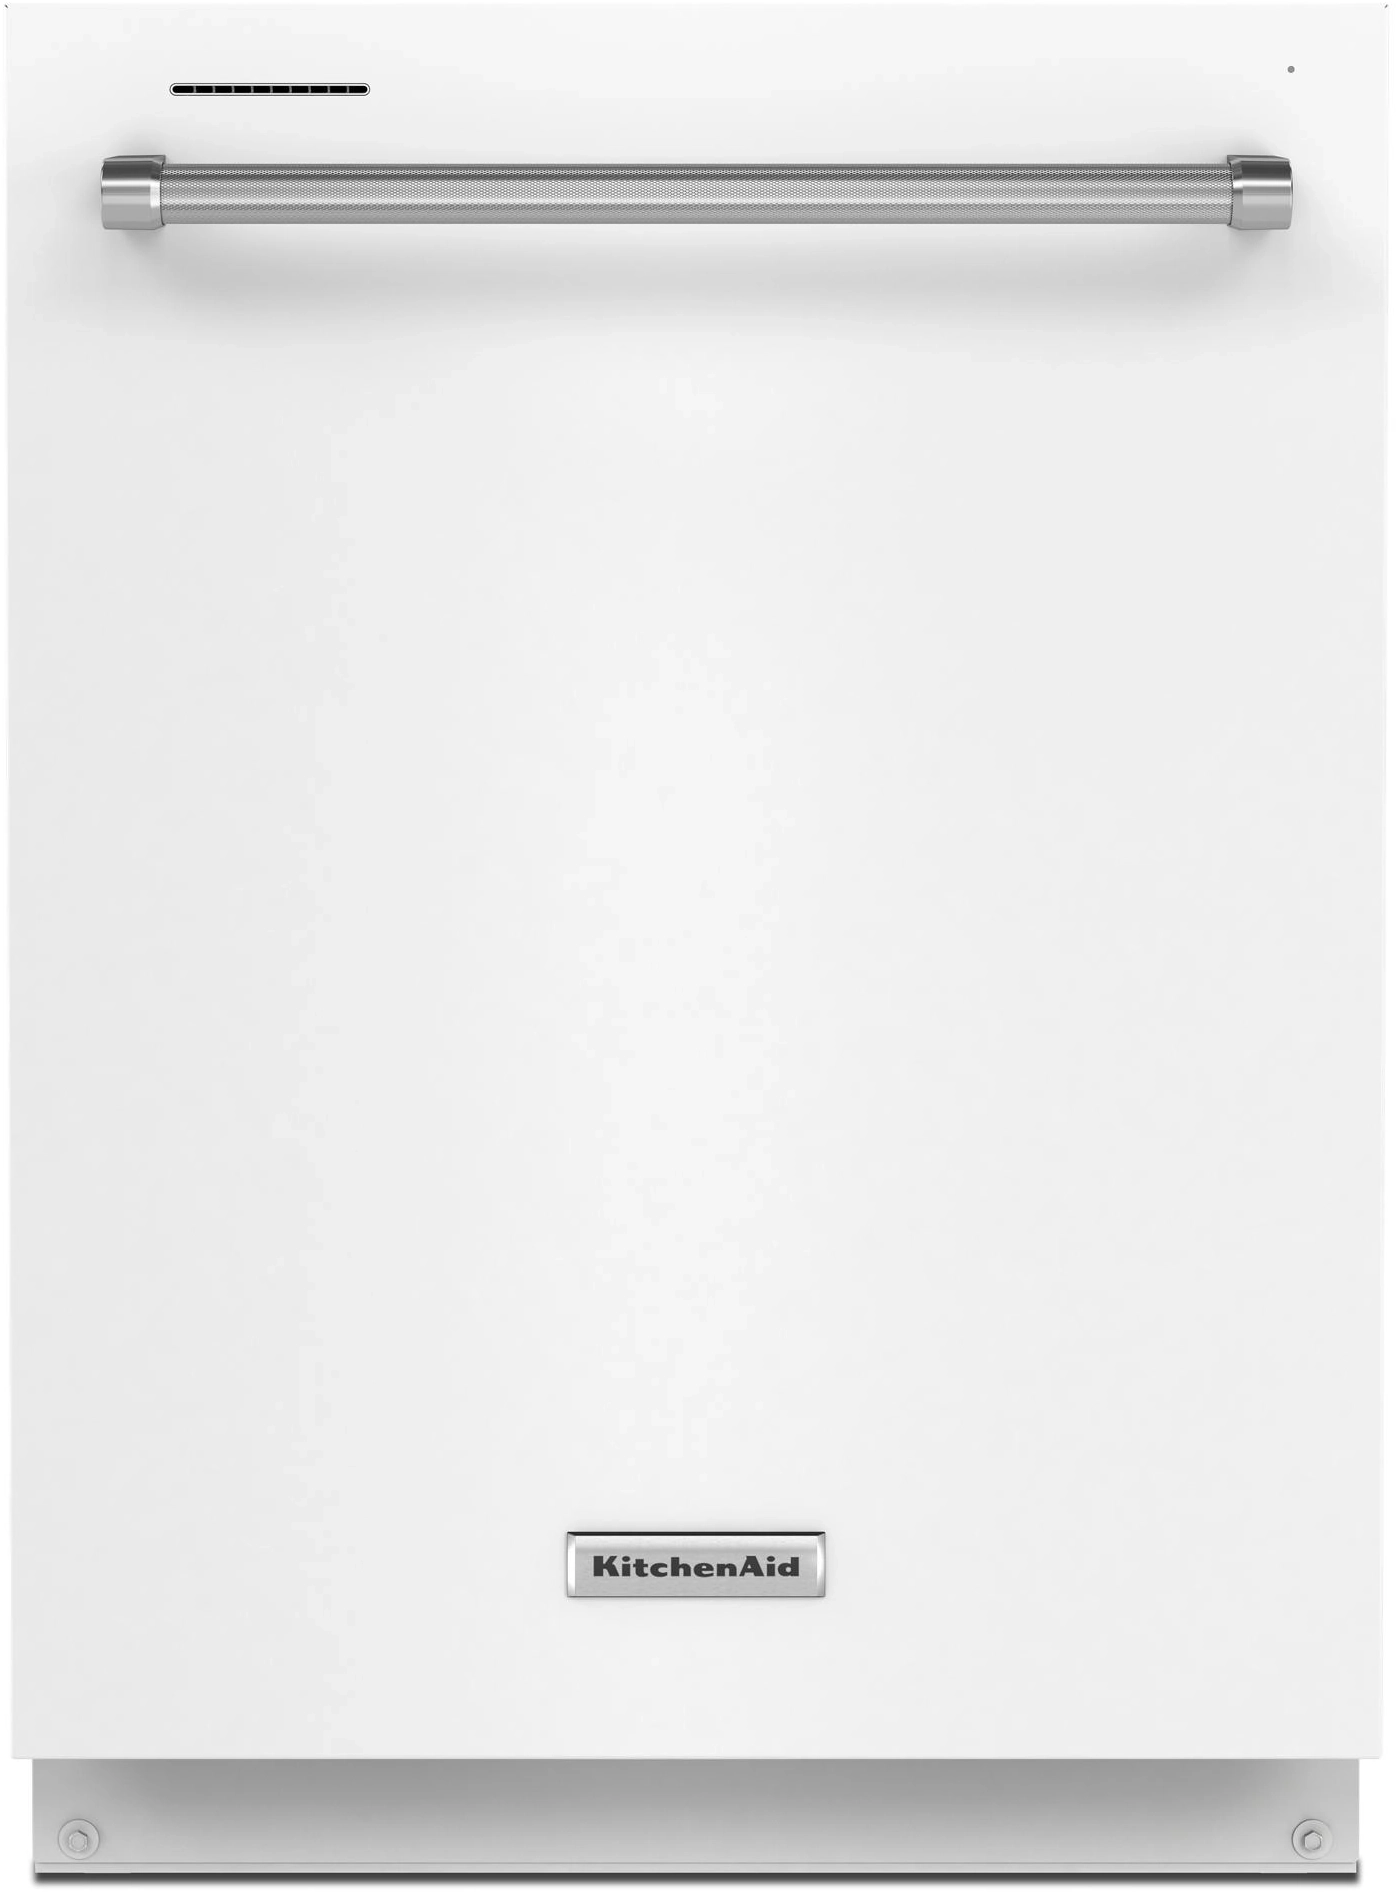 KitchenAid 24 Inch Built-In Top Control Dishwasher with Pro Wash Cycle